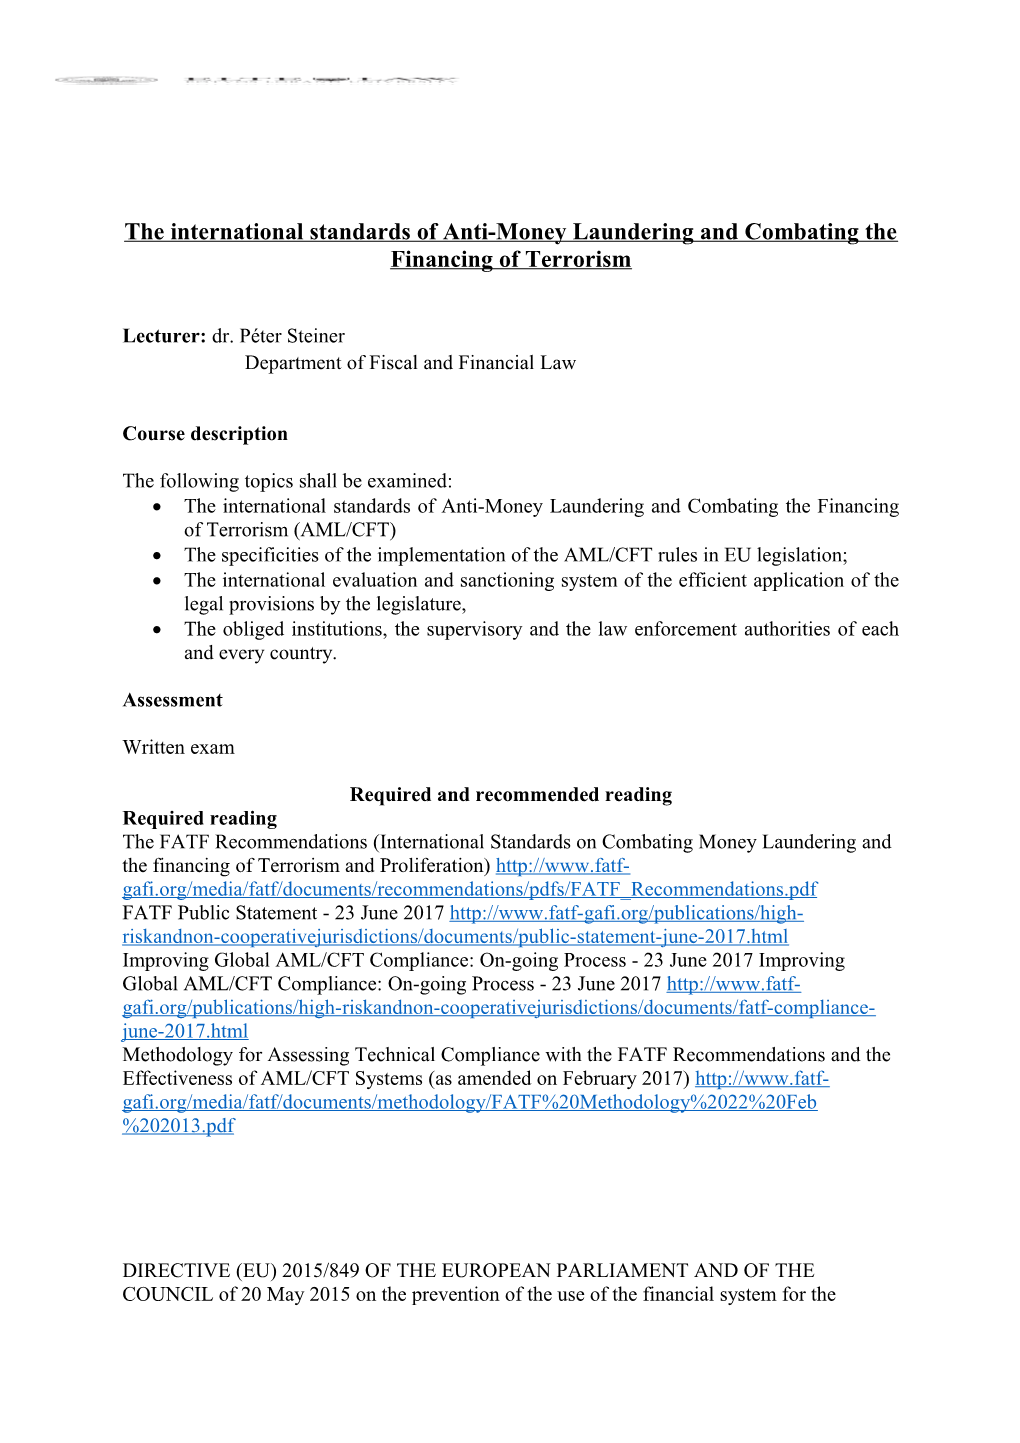 The International Standards of Anti-Money Laundering and Combating the Financing of Terrorism